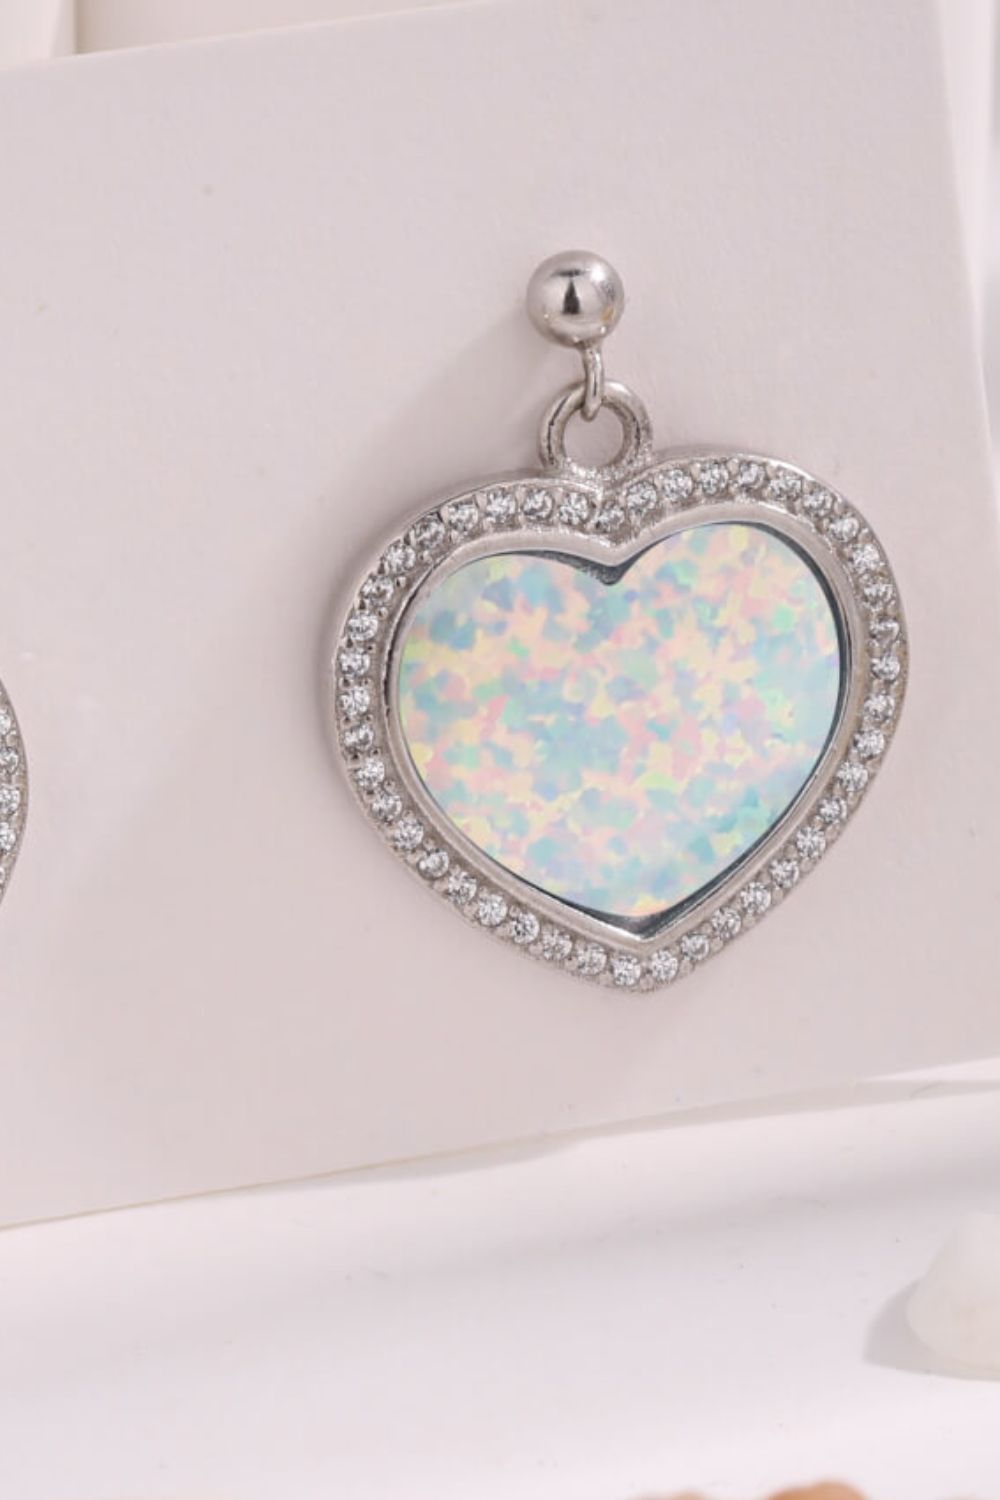 Platinum-Plated Opal Heart Earrings - Online Only